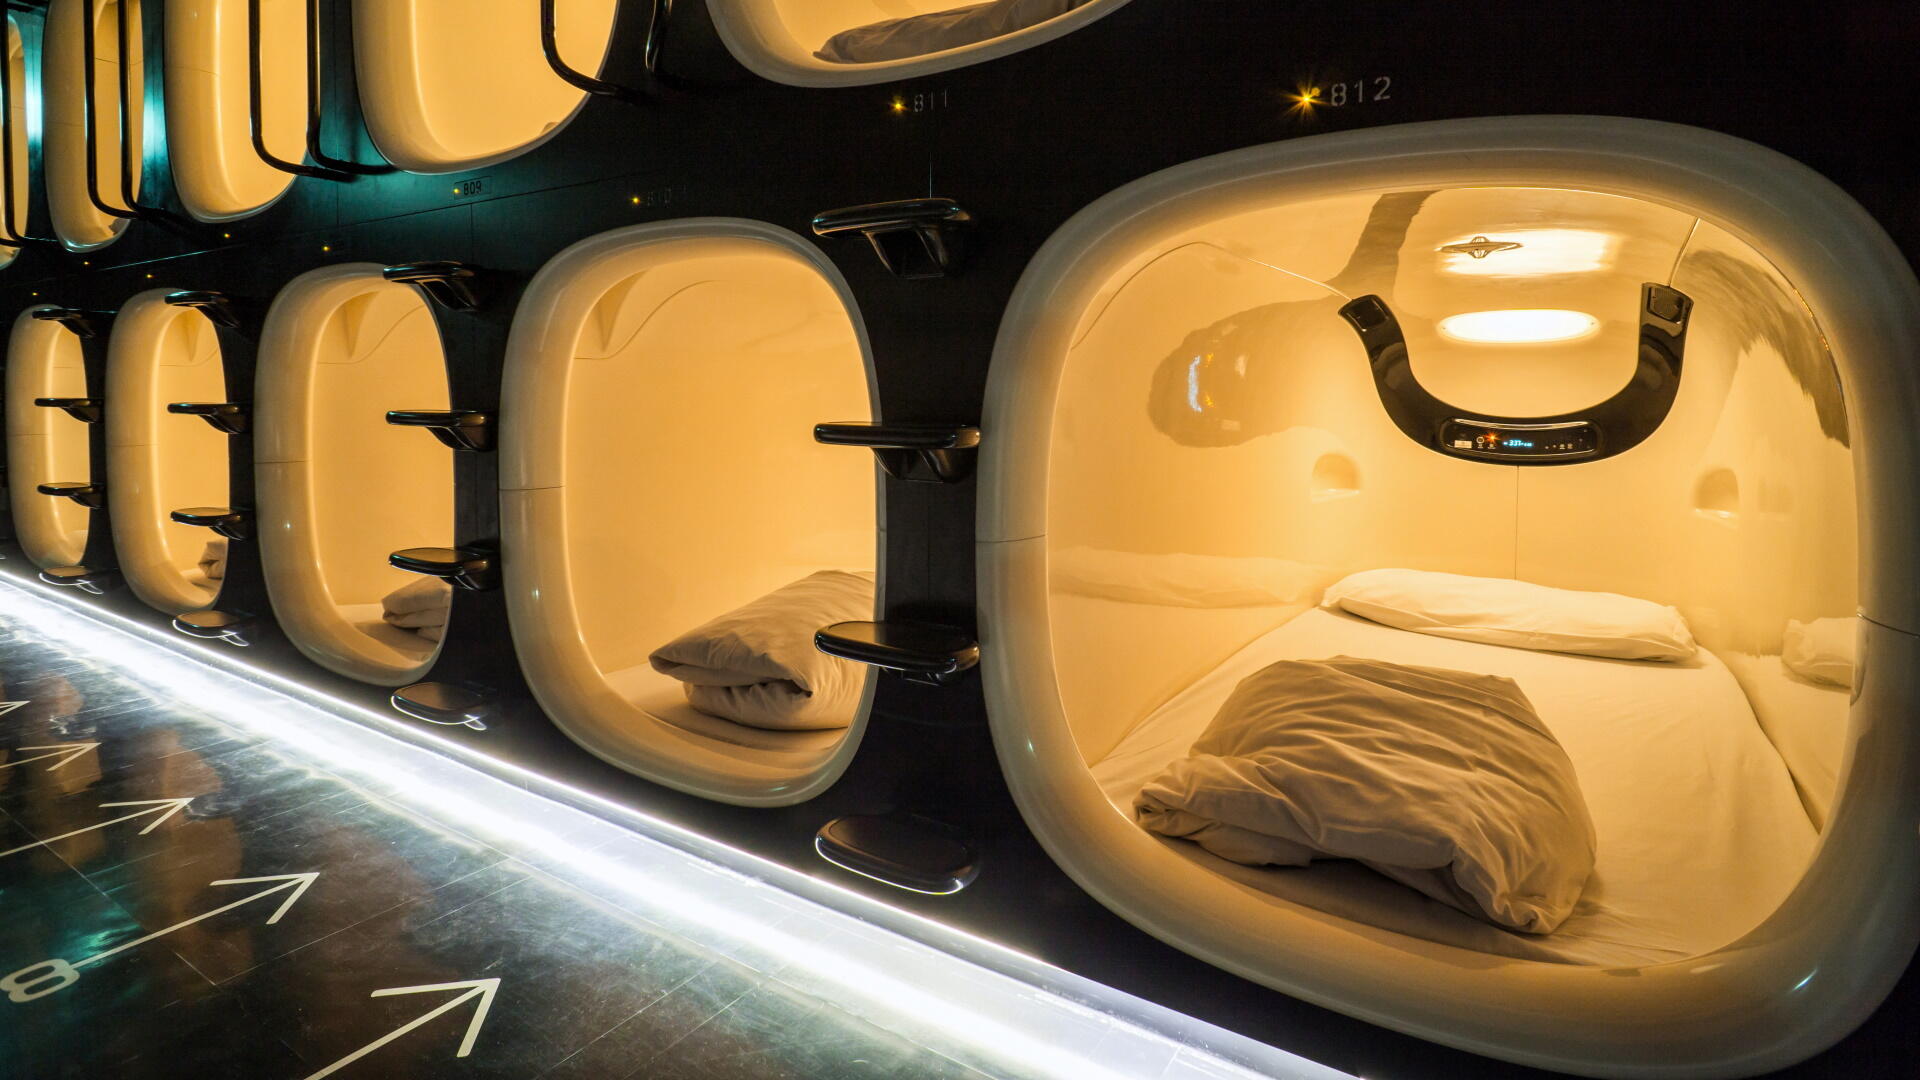 Staying at a capsule hotel